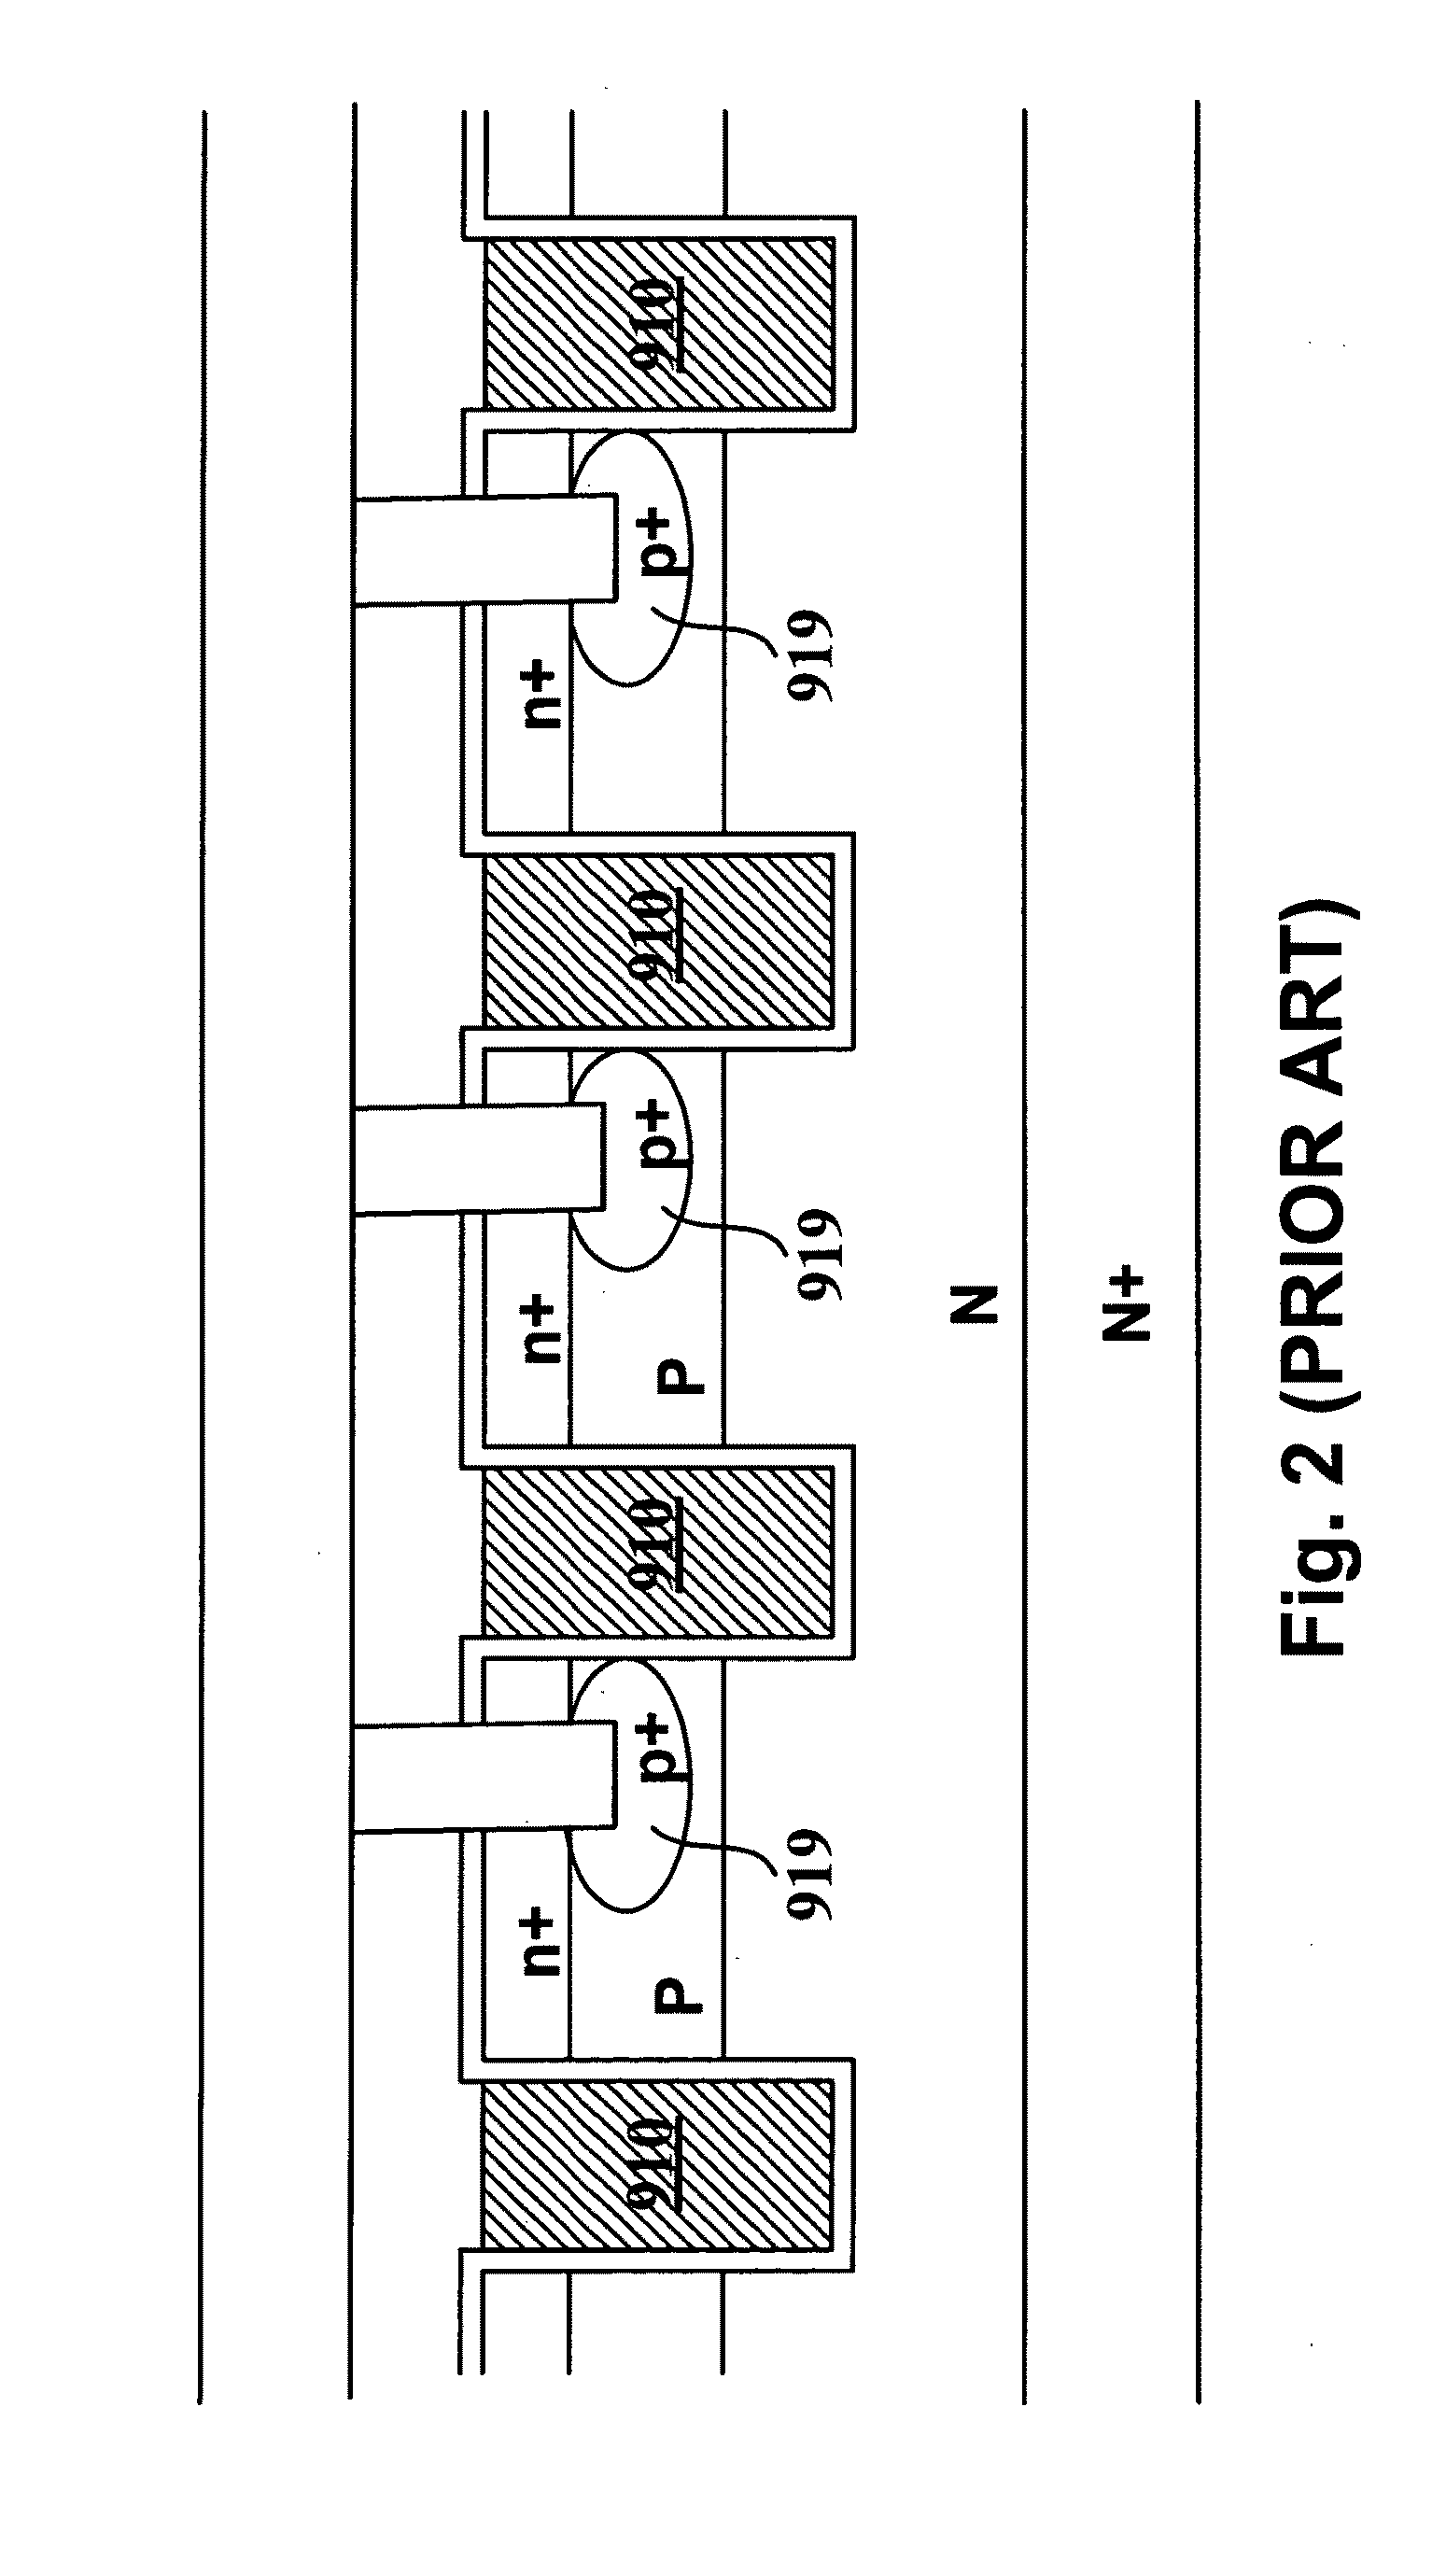 Trench MOSFET with terrace gate and self-aligned source trench contact